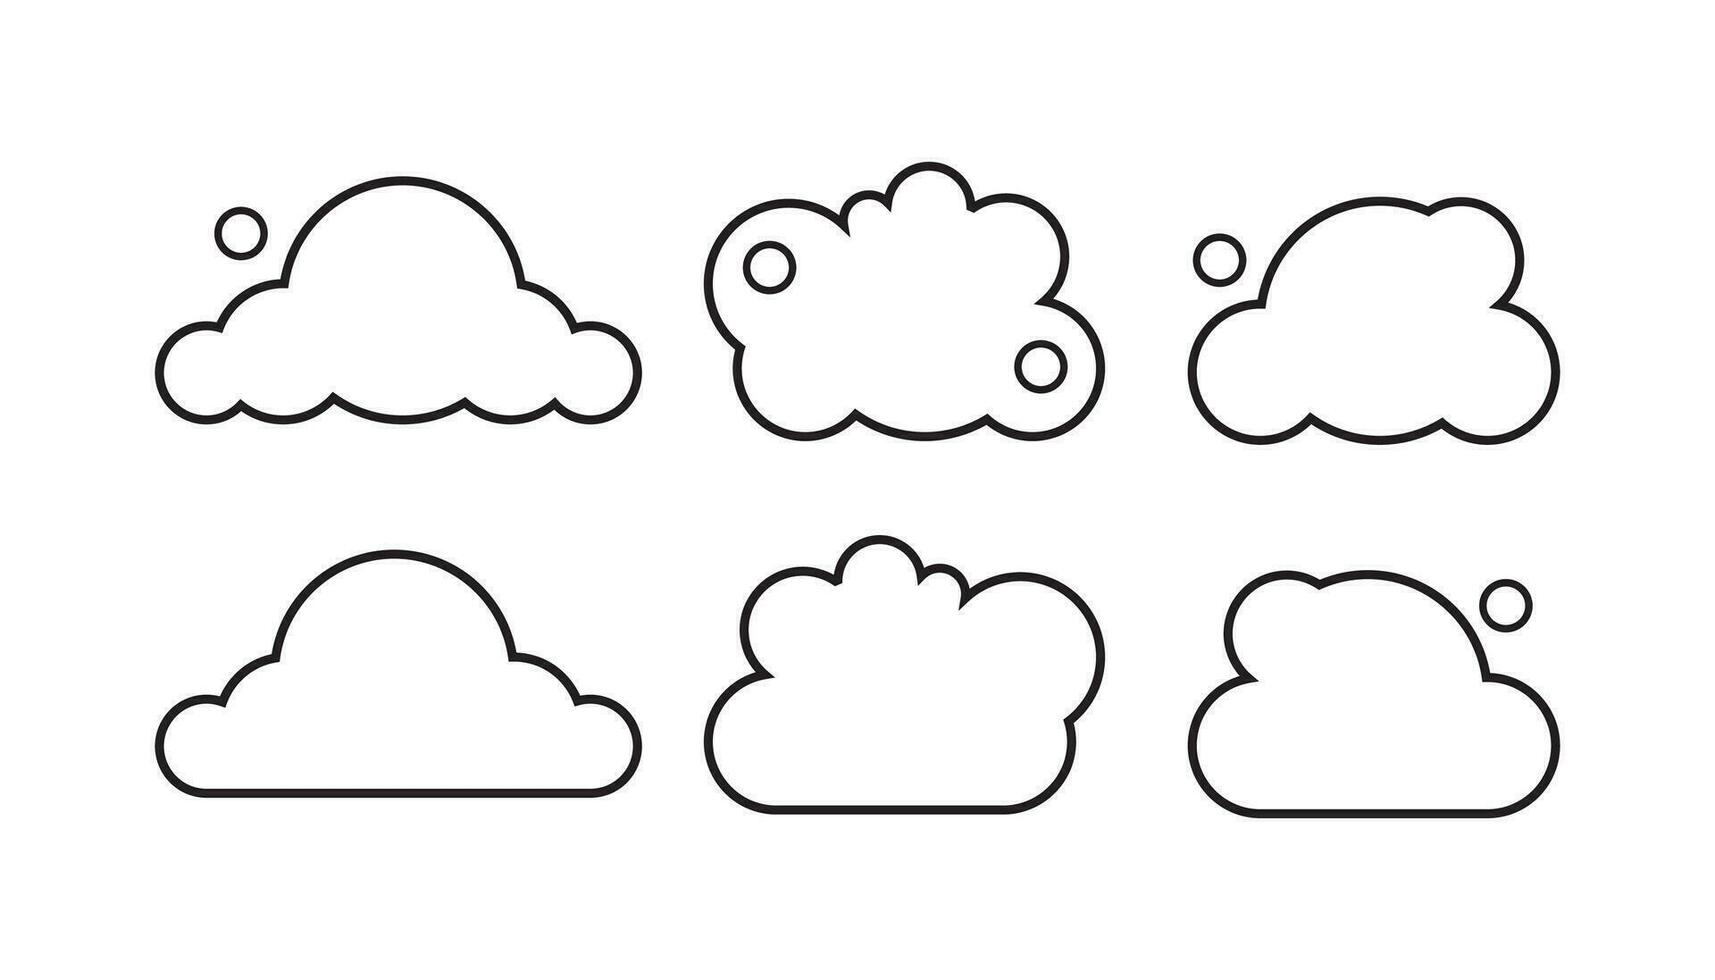 Cloud Icons in a trendy flat style that is isolated on a white background. Vector illustration element.